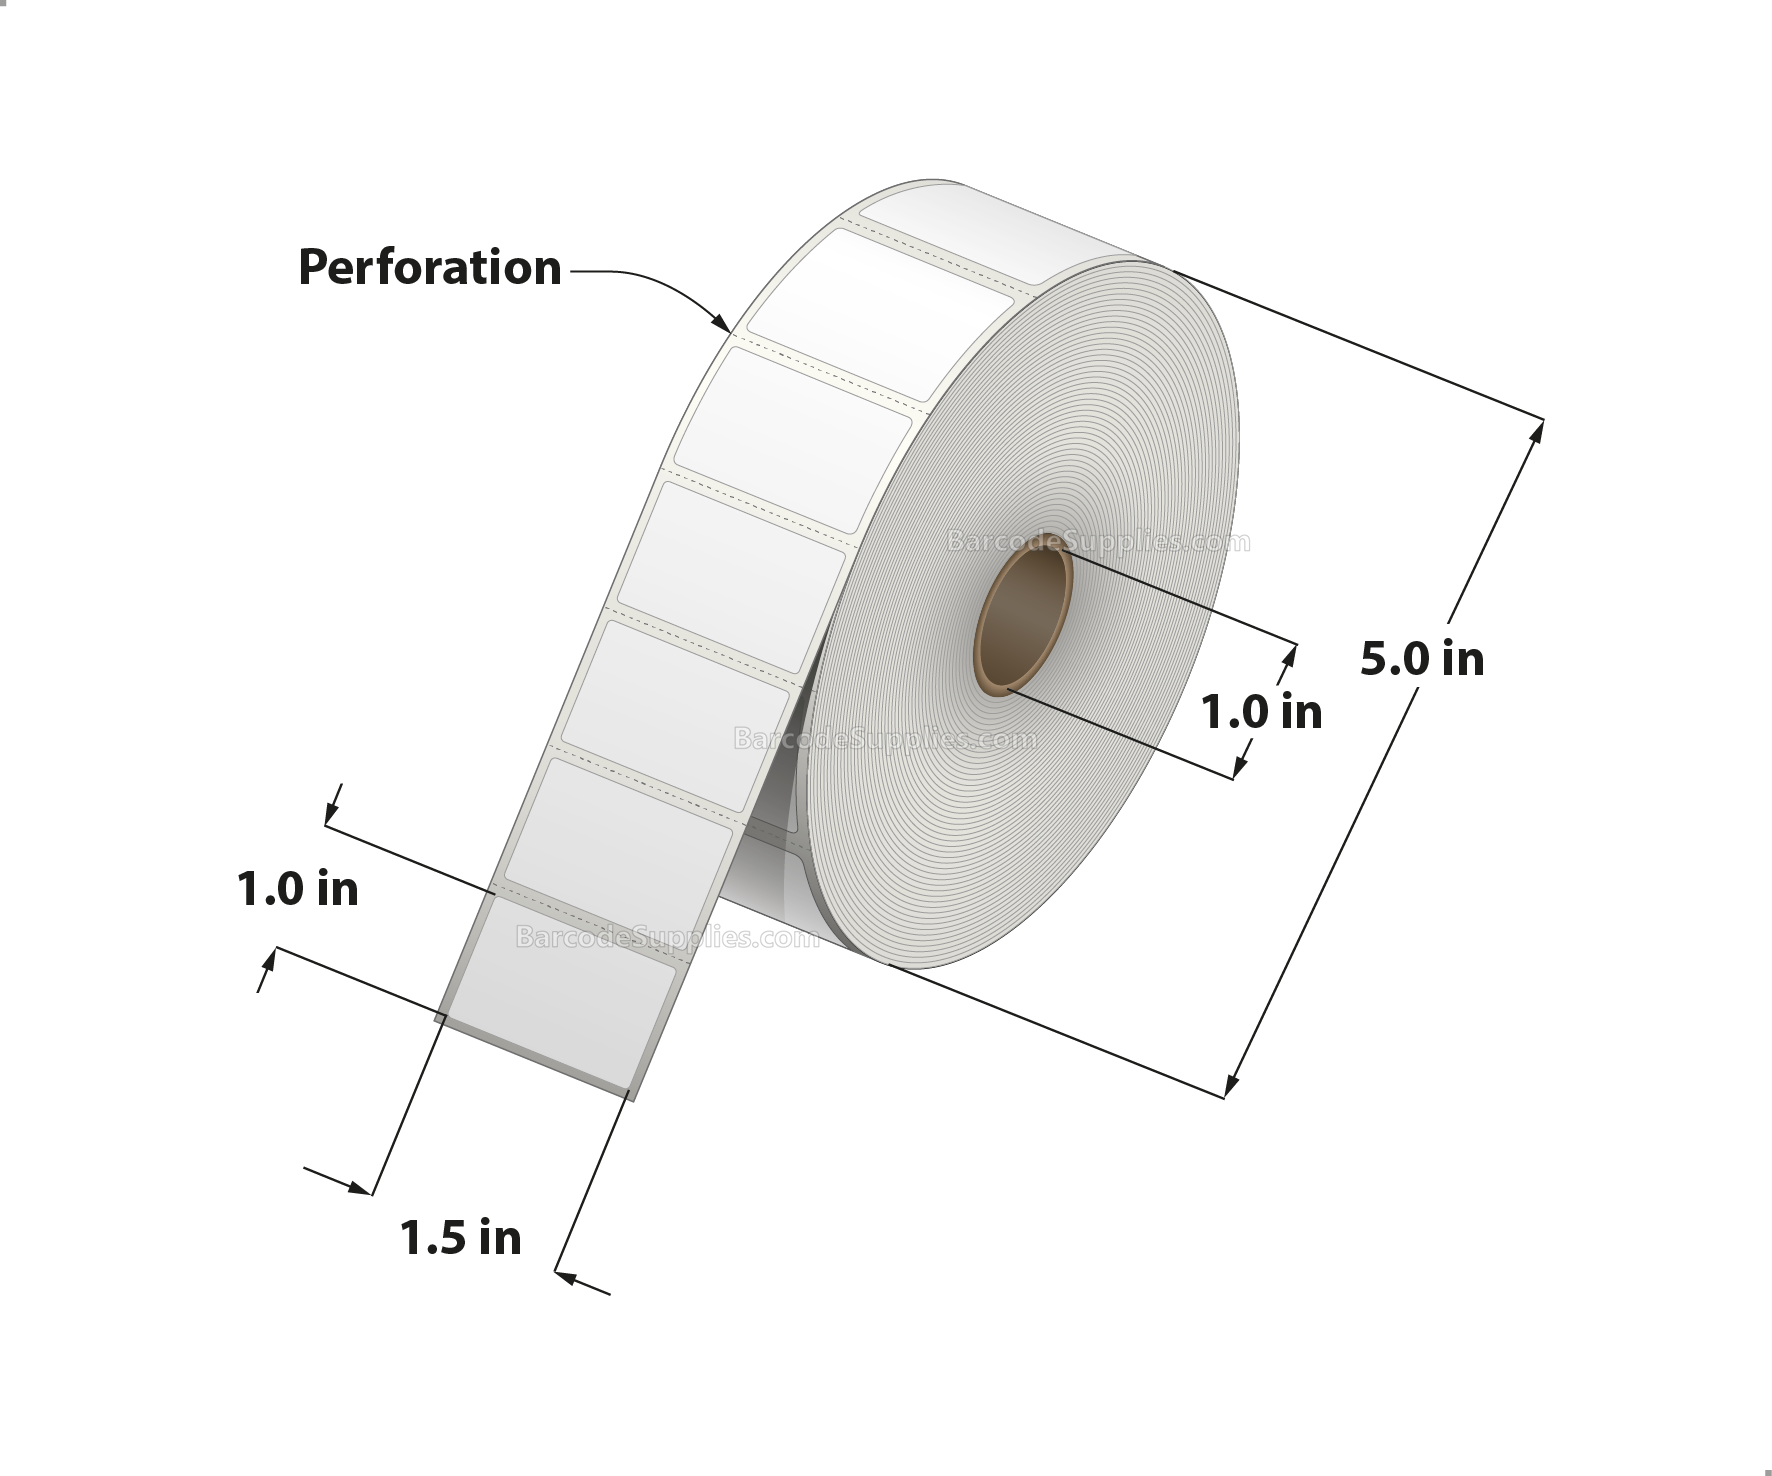 1.5 x 1 Thermal Transfer White Labels With Permanent Acrylic Adhesive - Perforated - 2300 Labels Per Roll - Carton Of 4 Rolls - 9200 Labels Total - MPN: TH151-15PTT